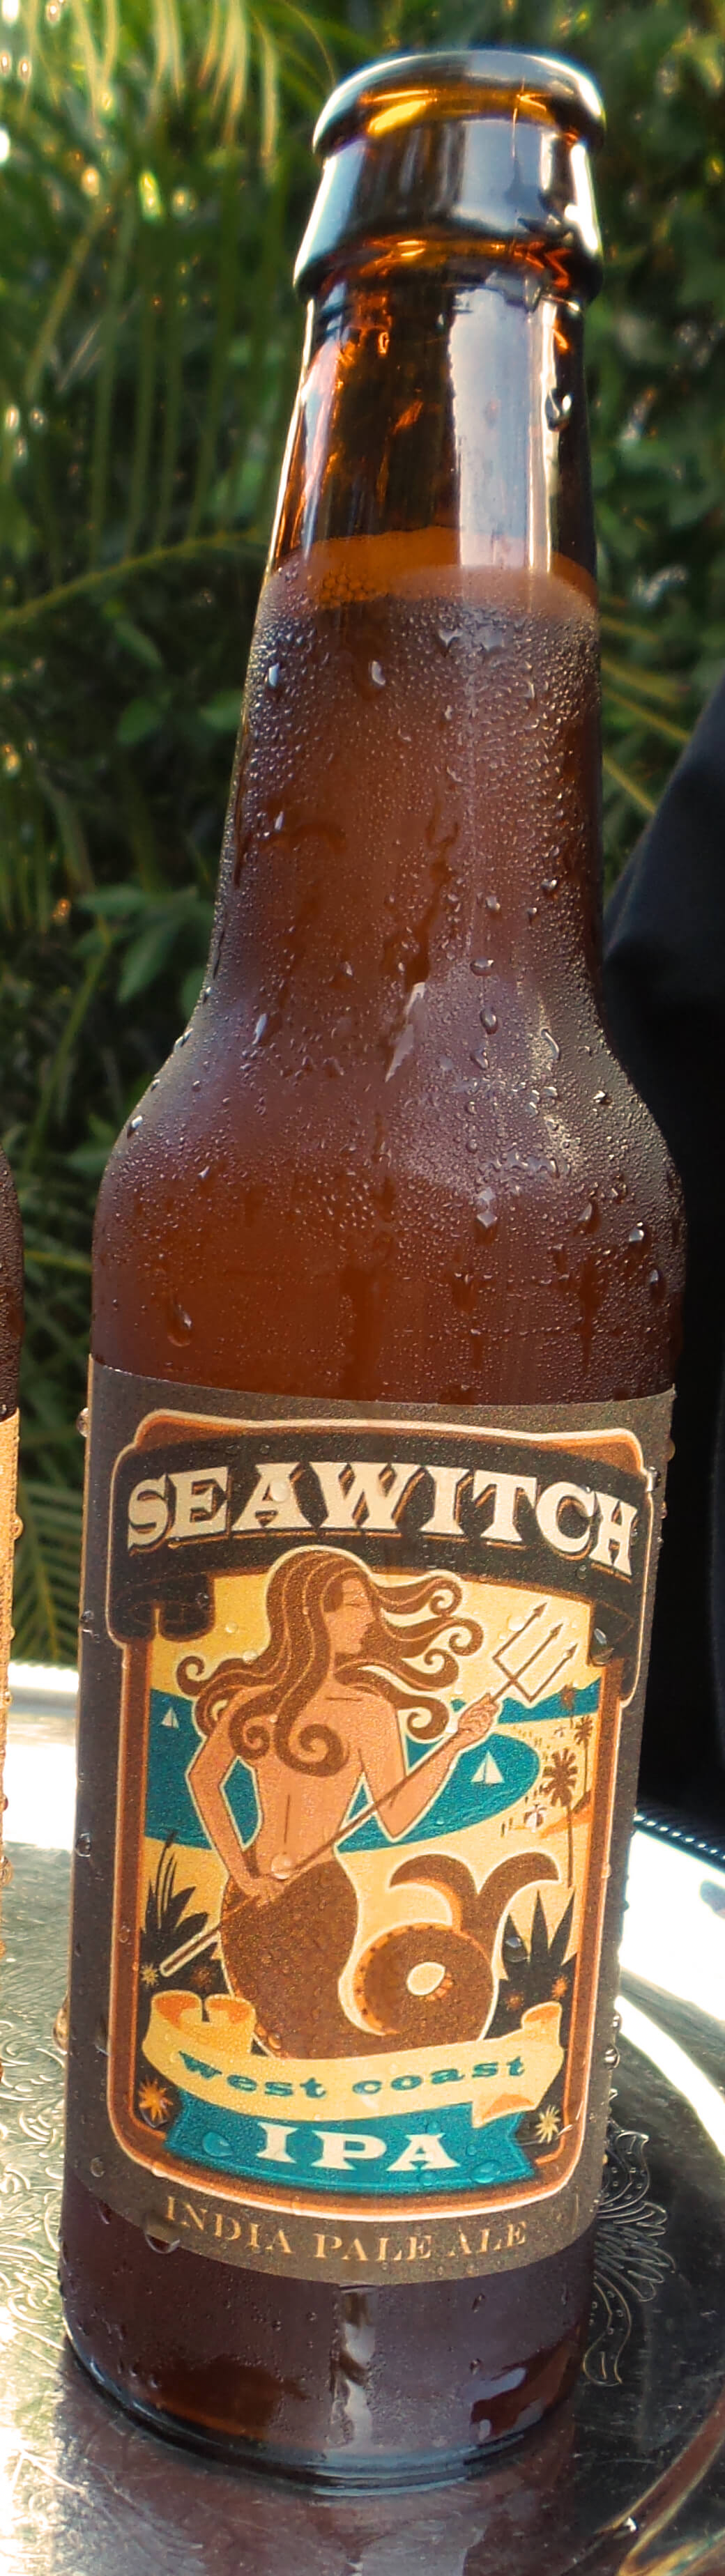 Sea Witch Craft Beer, a West Coast India Pale Ale served exclusively aboard Princess ships. 